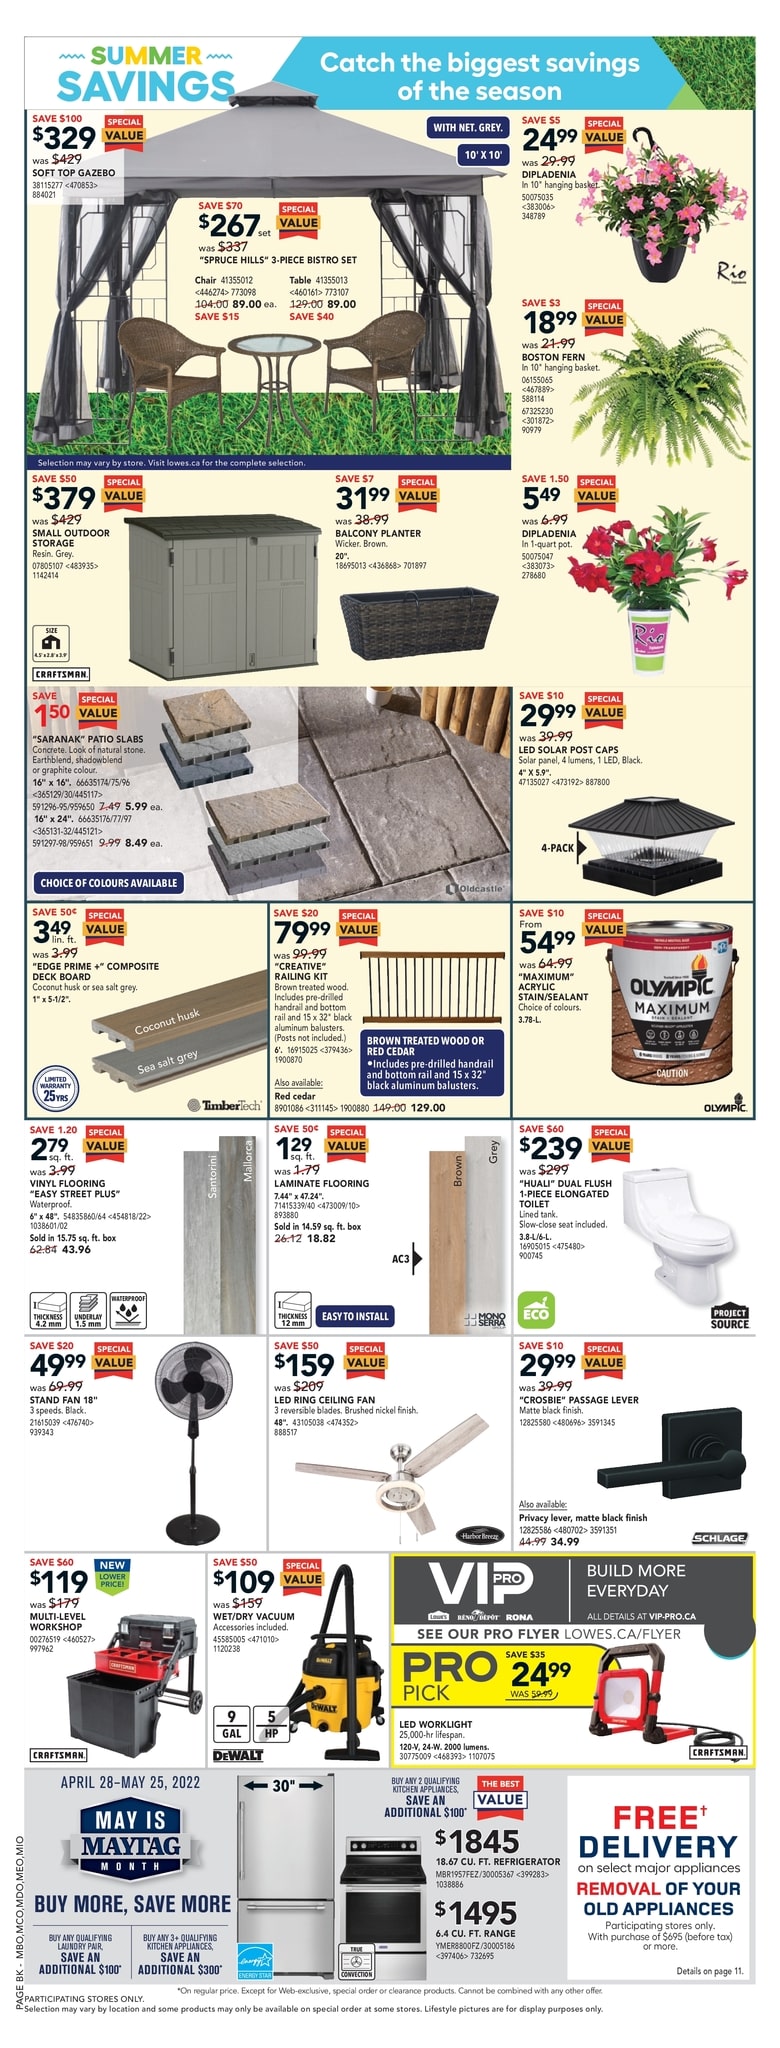 LOWE'S - Weekly Flyer Specials - Page 2